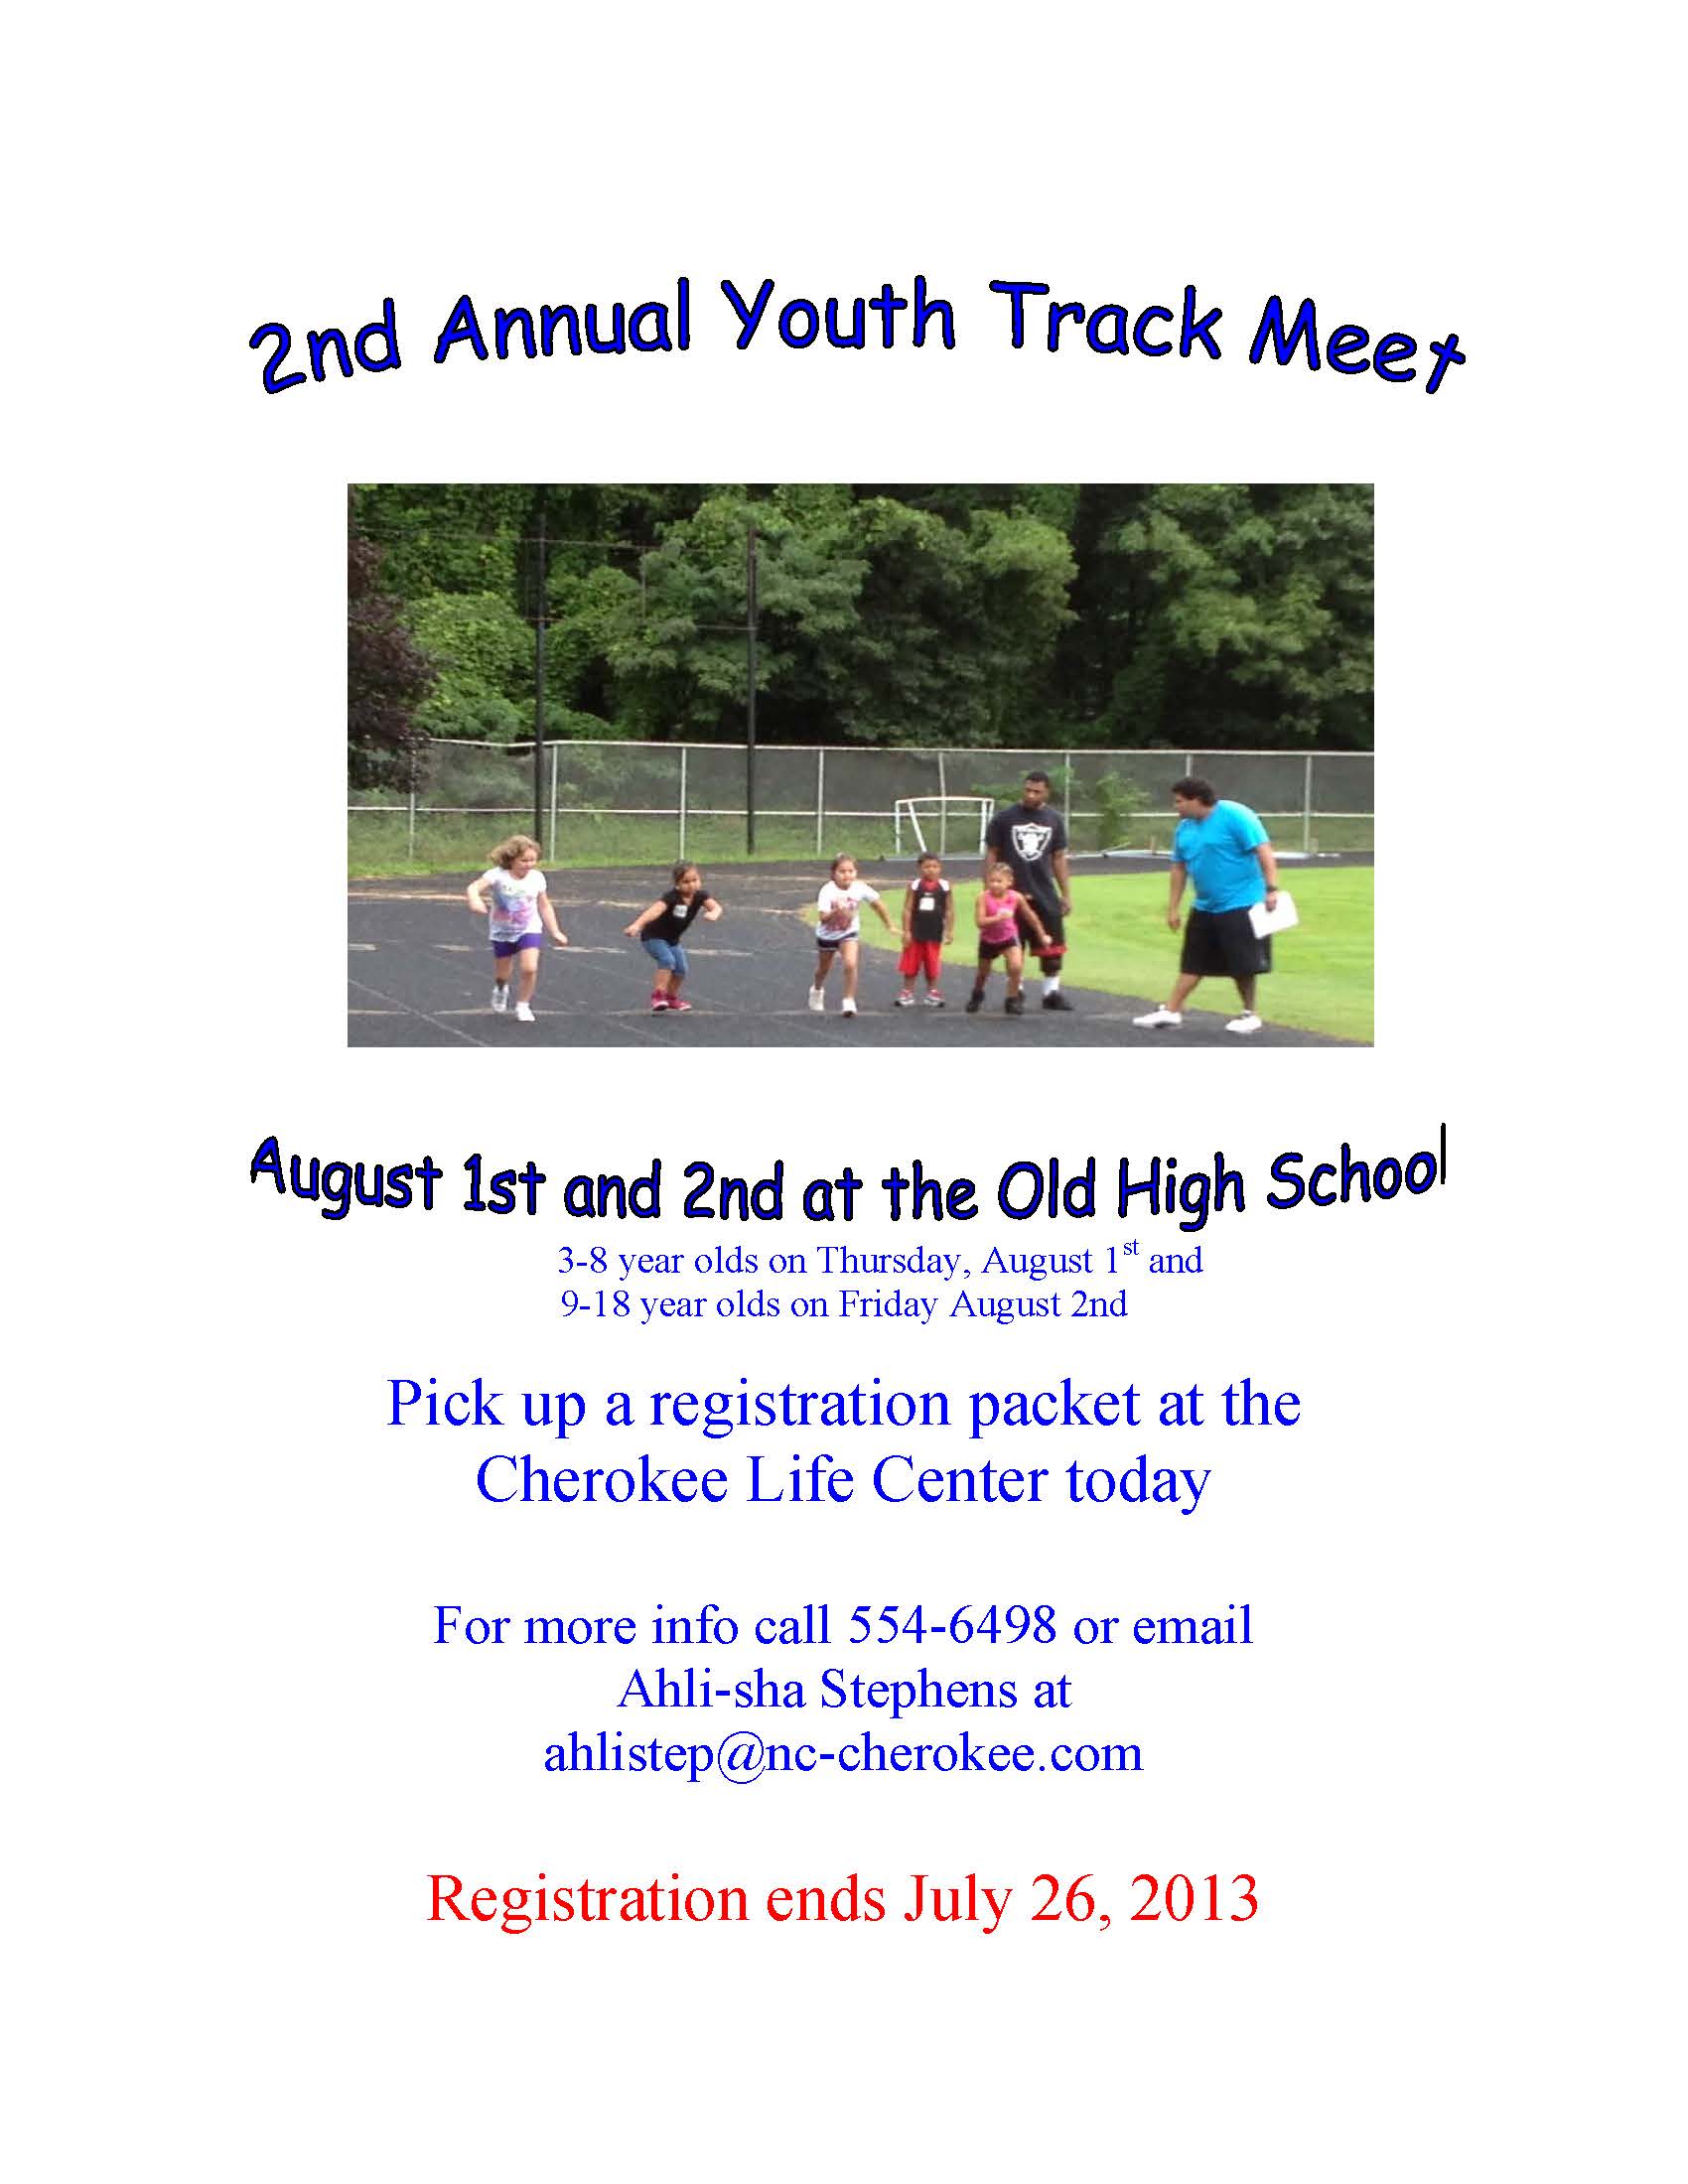 2nd Annual CLC Track Meet Flyer